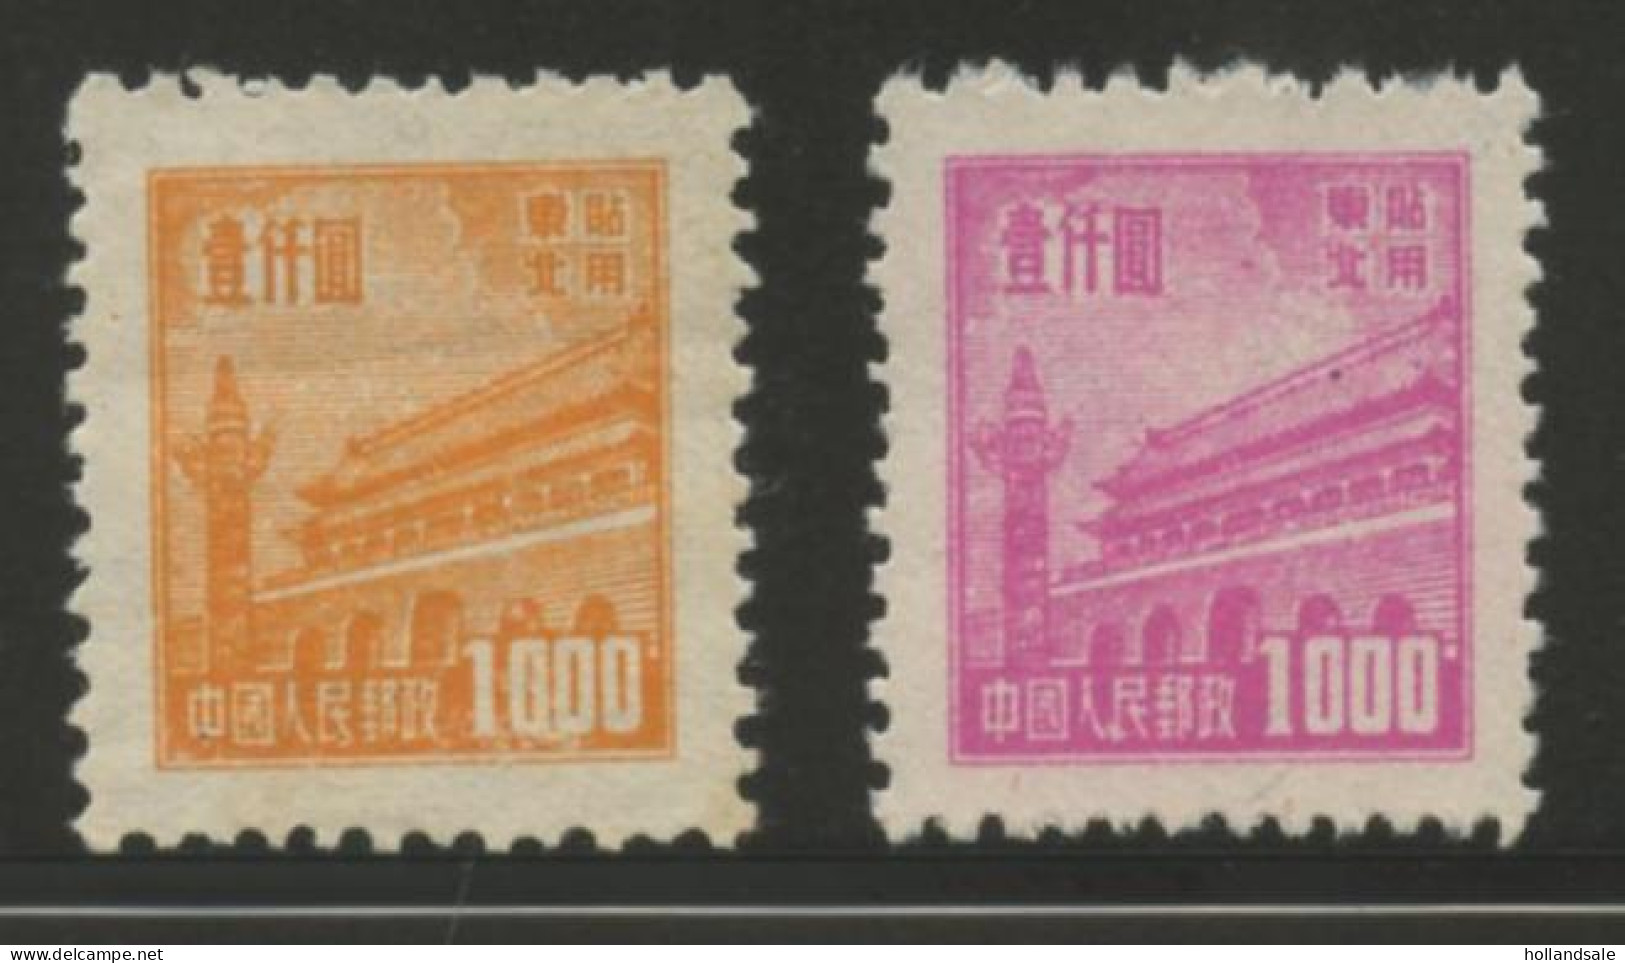 CHINA NORTH EAST - 1950 2x $1000 Tien An Men Stamps From RN1. Unused. MICHEL # 163-164. - North-Eastern 1946-48